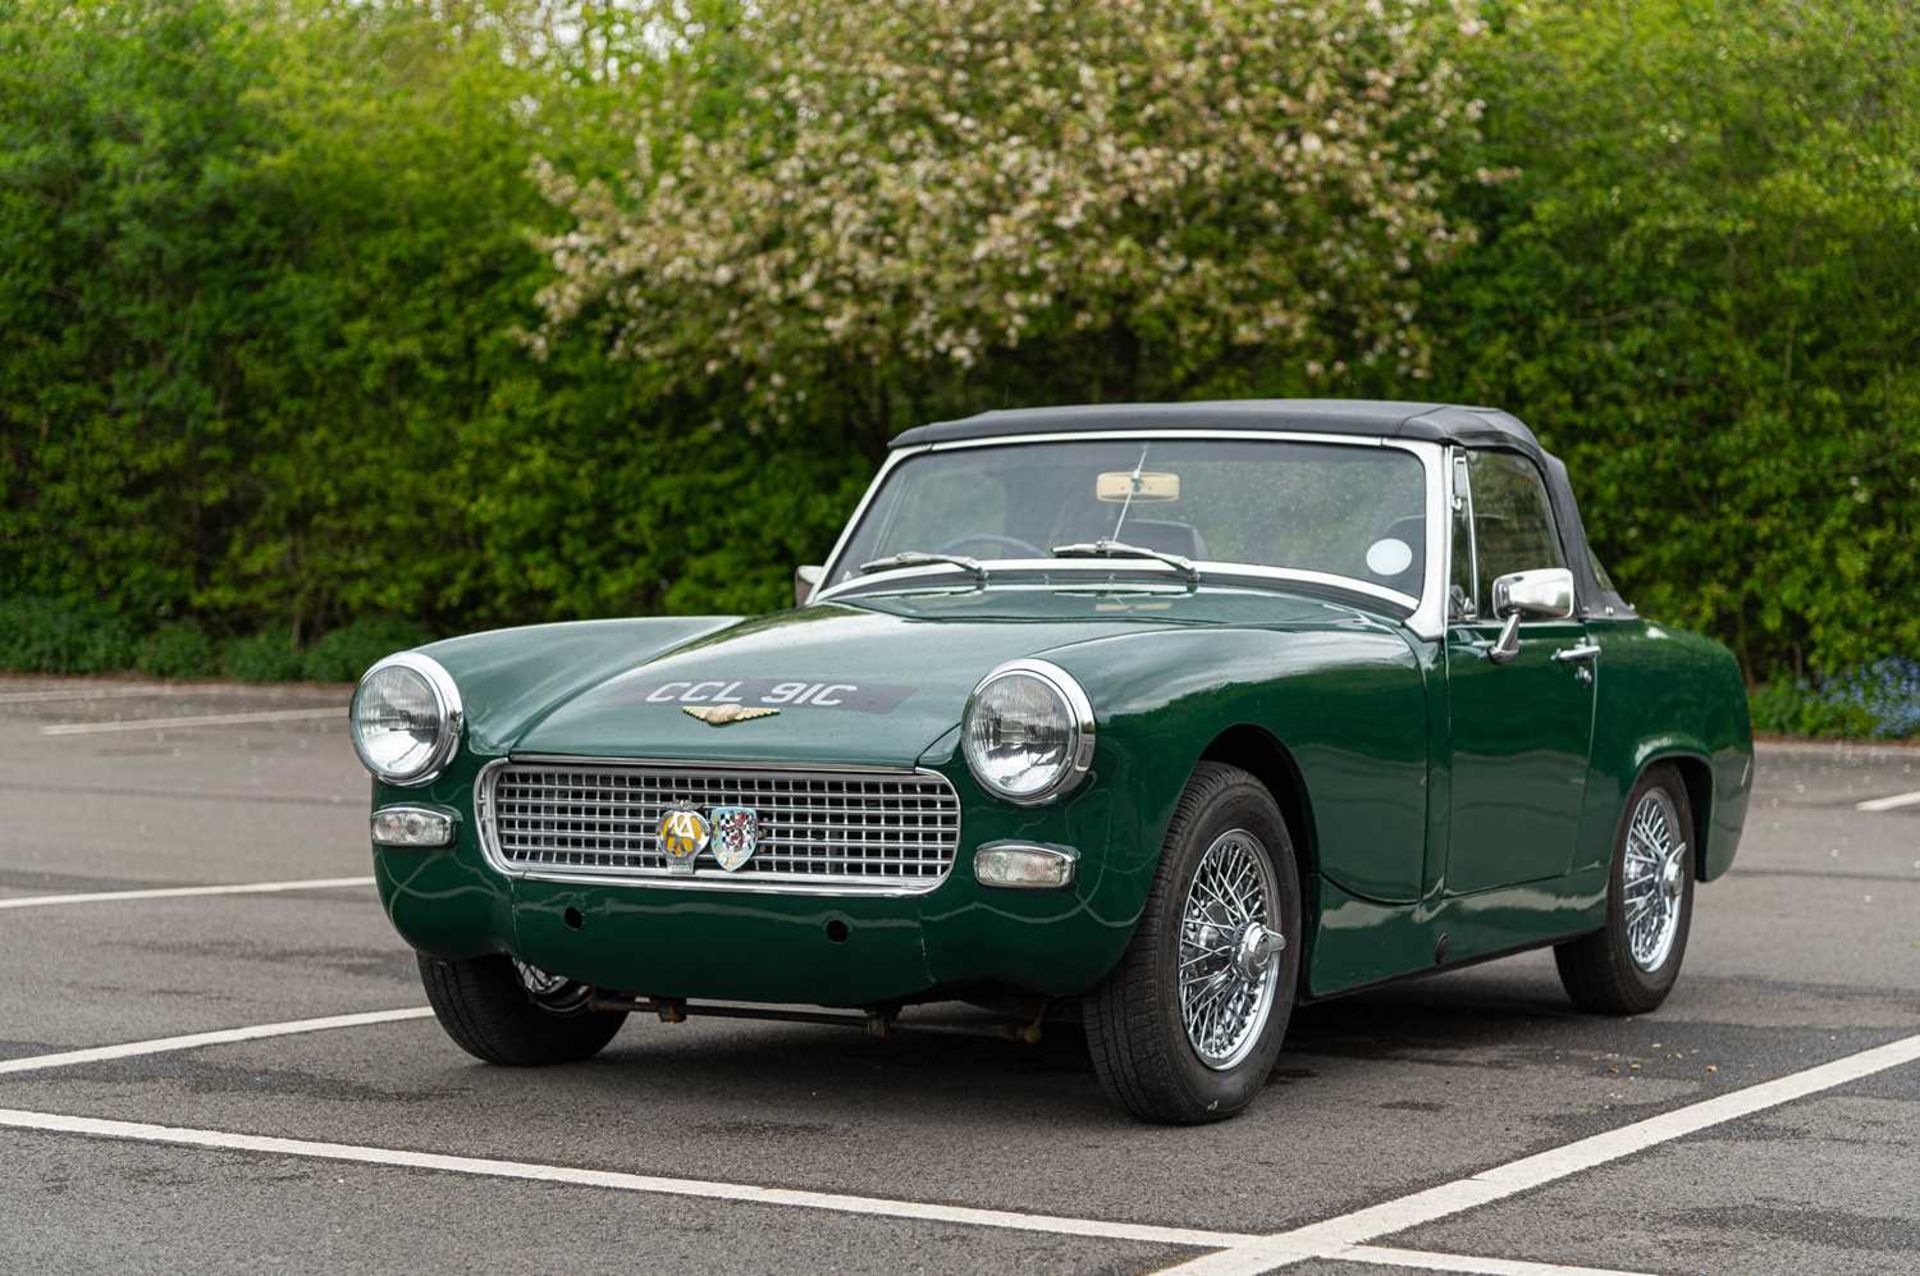 1965 Austin-Healey Sprite Formerly the property of British Formula One racing driver David Piper - Image 3 of 71